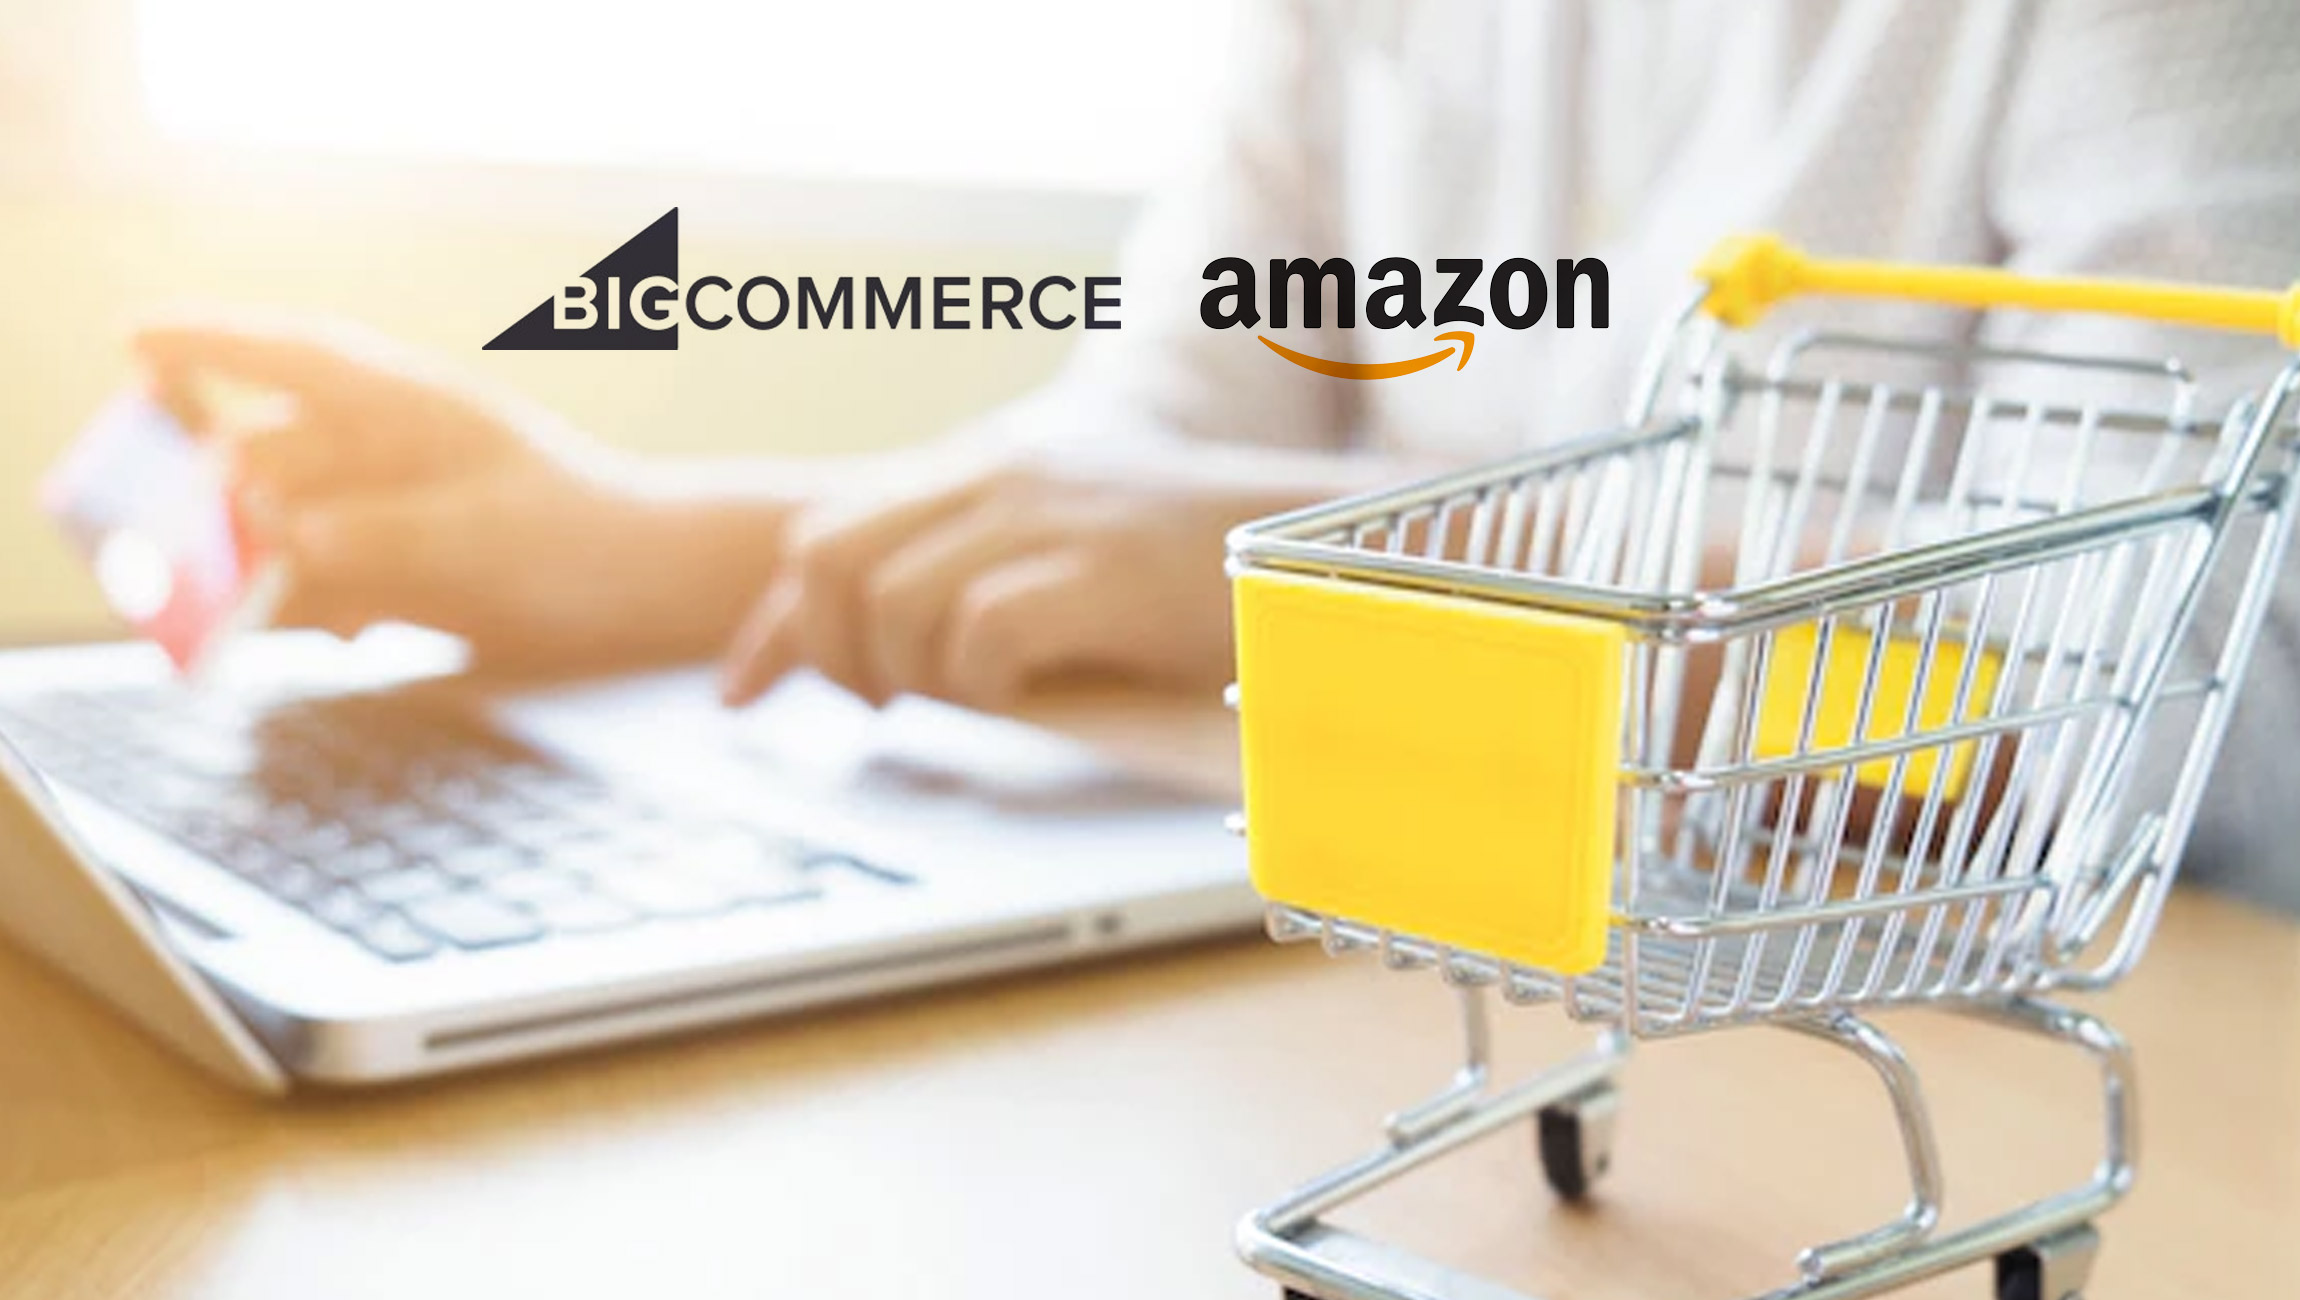 BigCommerce Announces Integration for Amazon’s Buy with Prime Enabling Merchants to Accelerate Business Growth 1